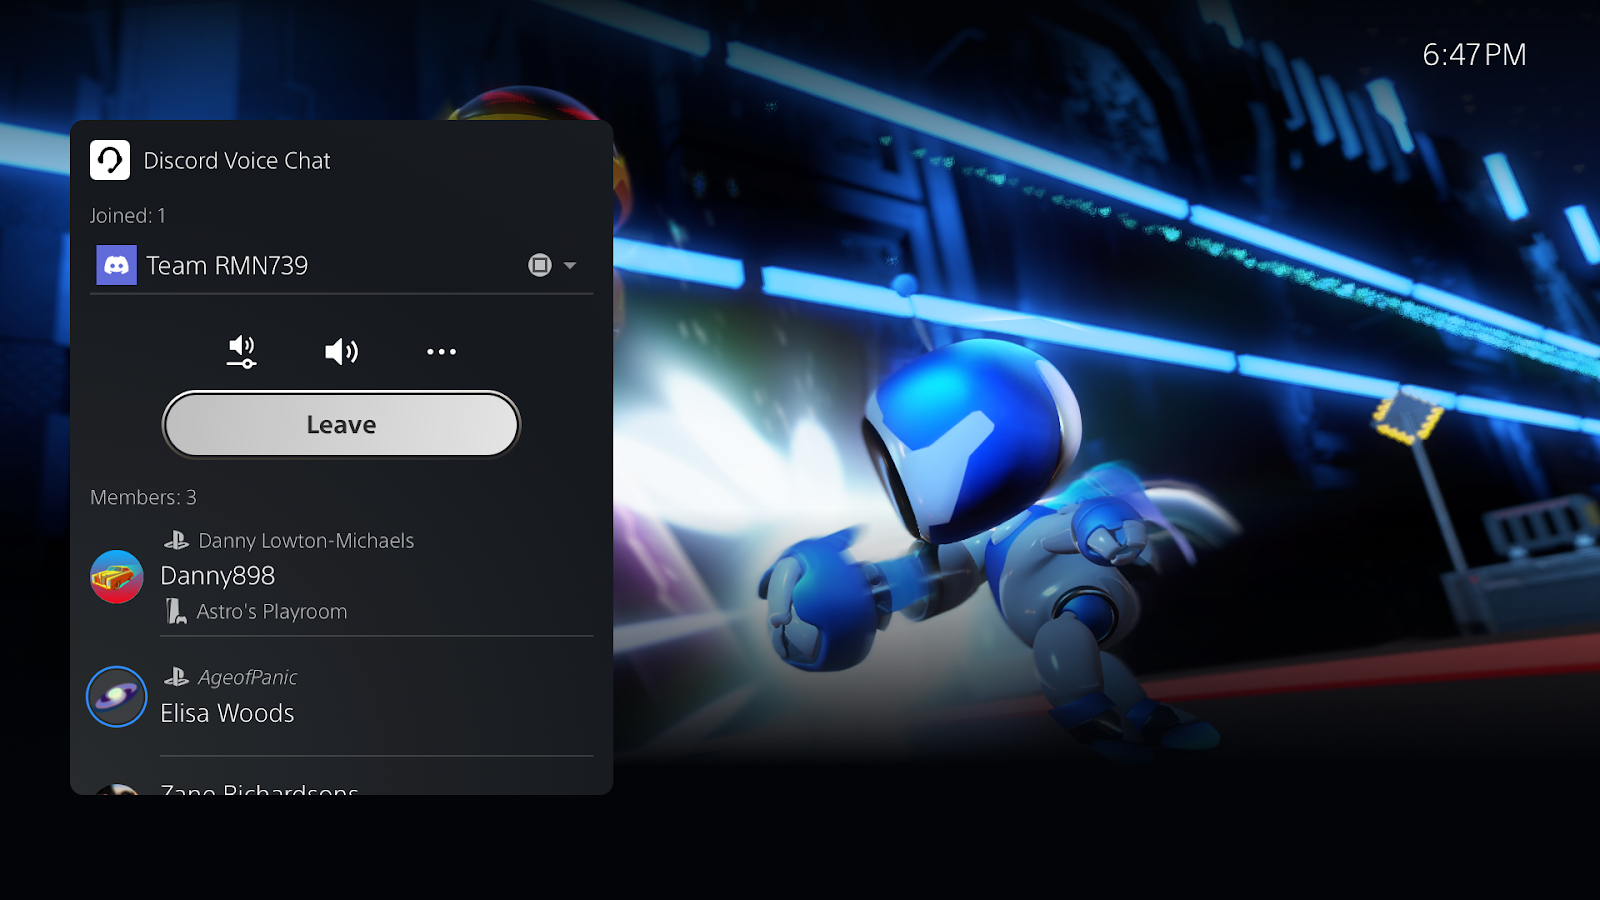 Discord voice chat on PS5